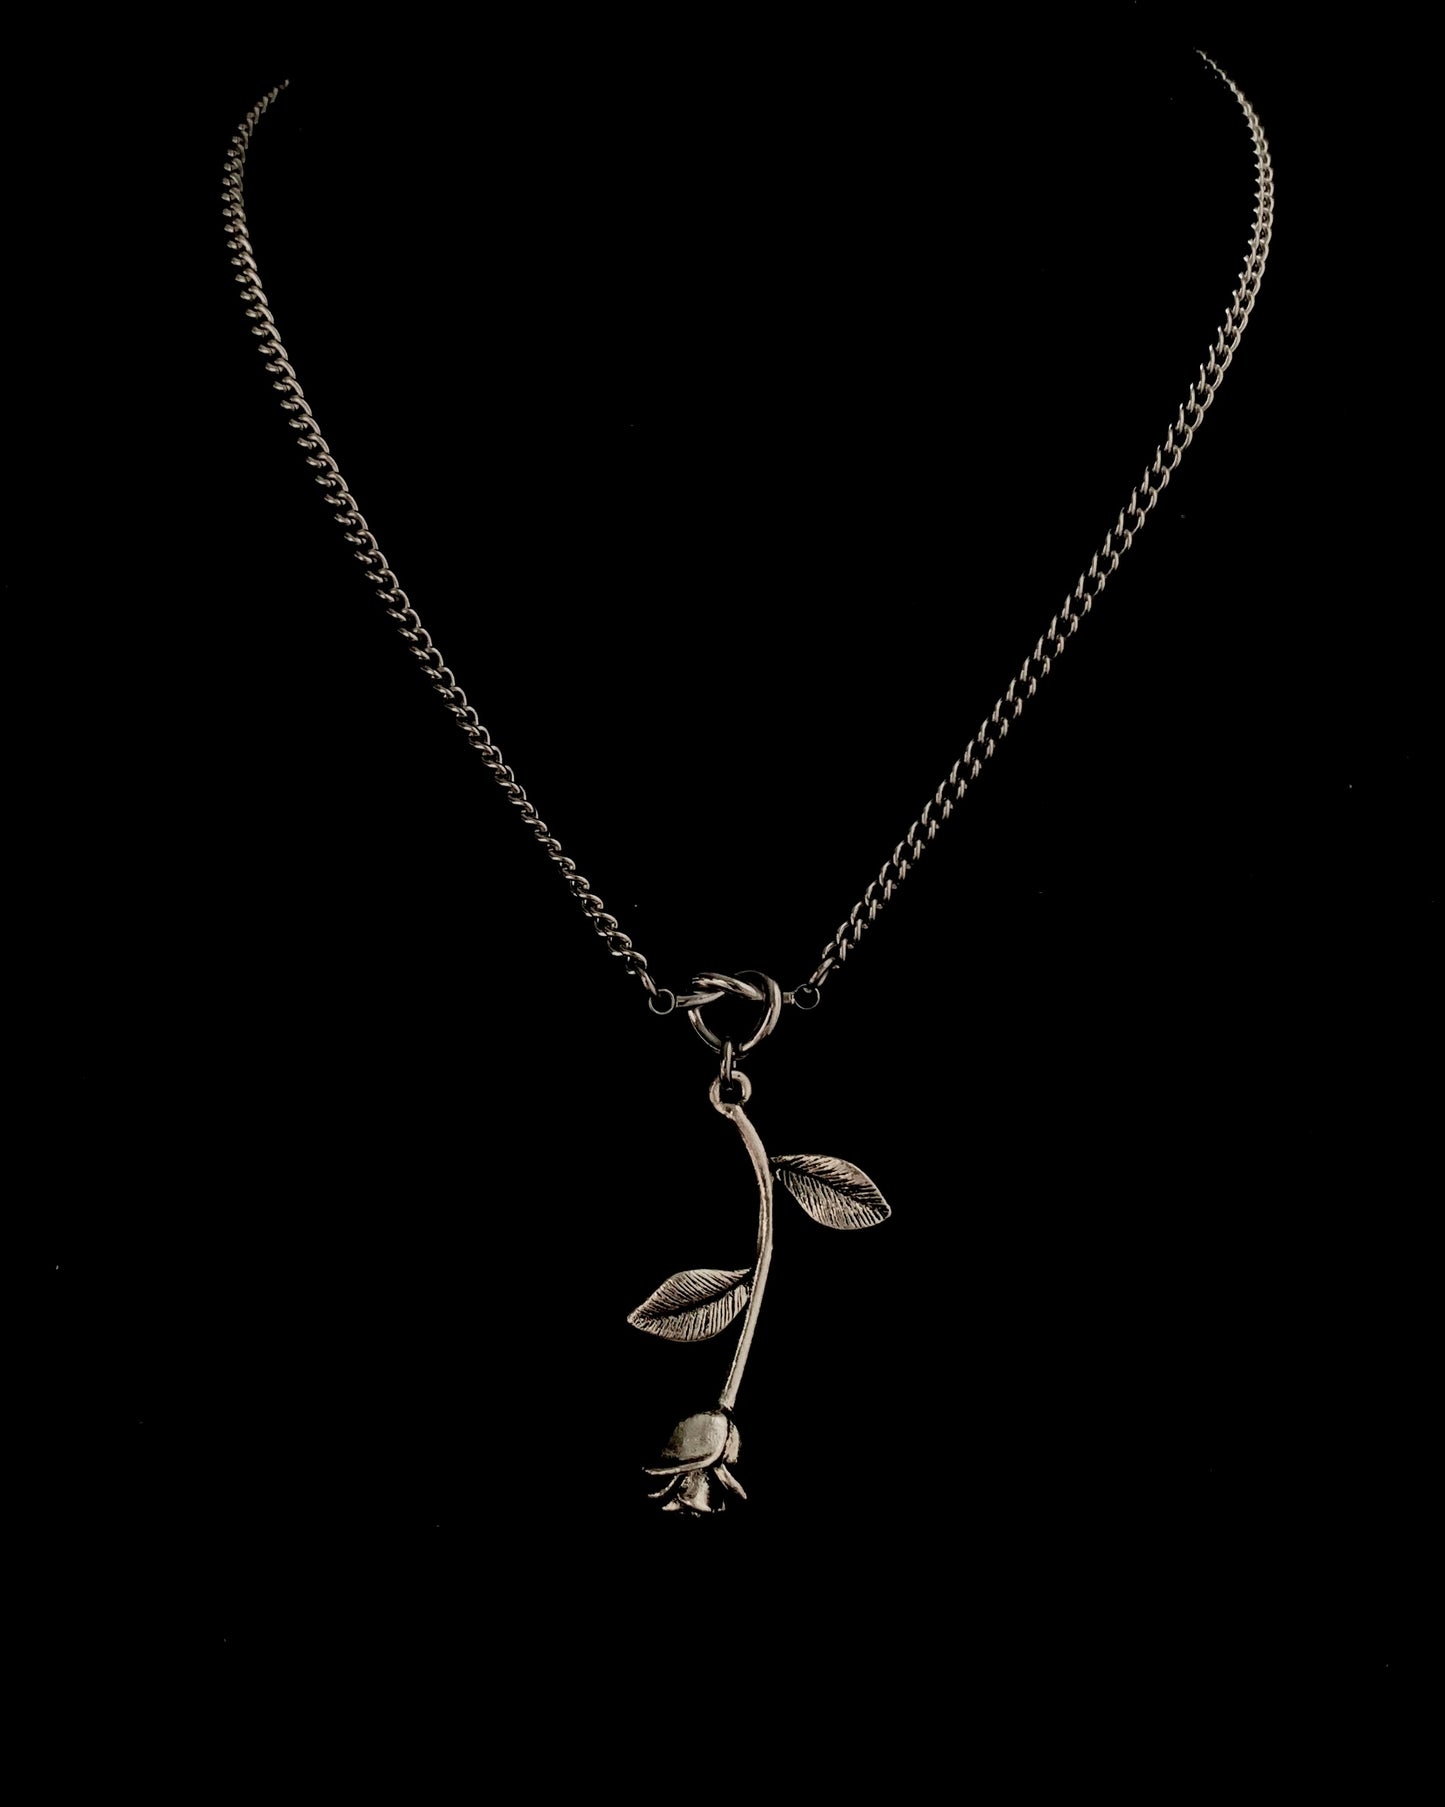 Wilted Flower necklace